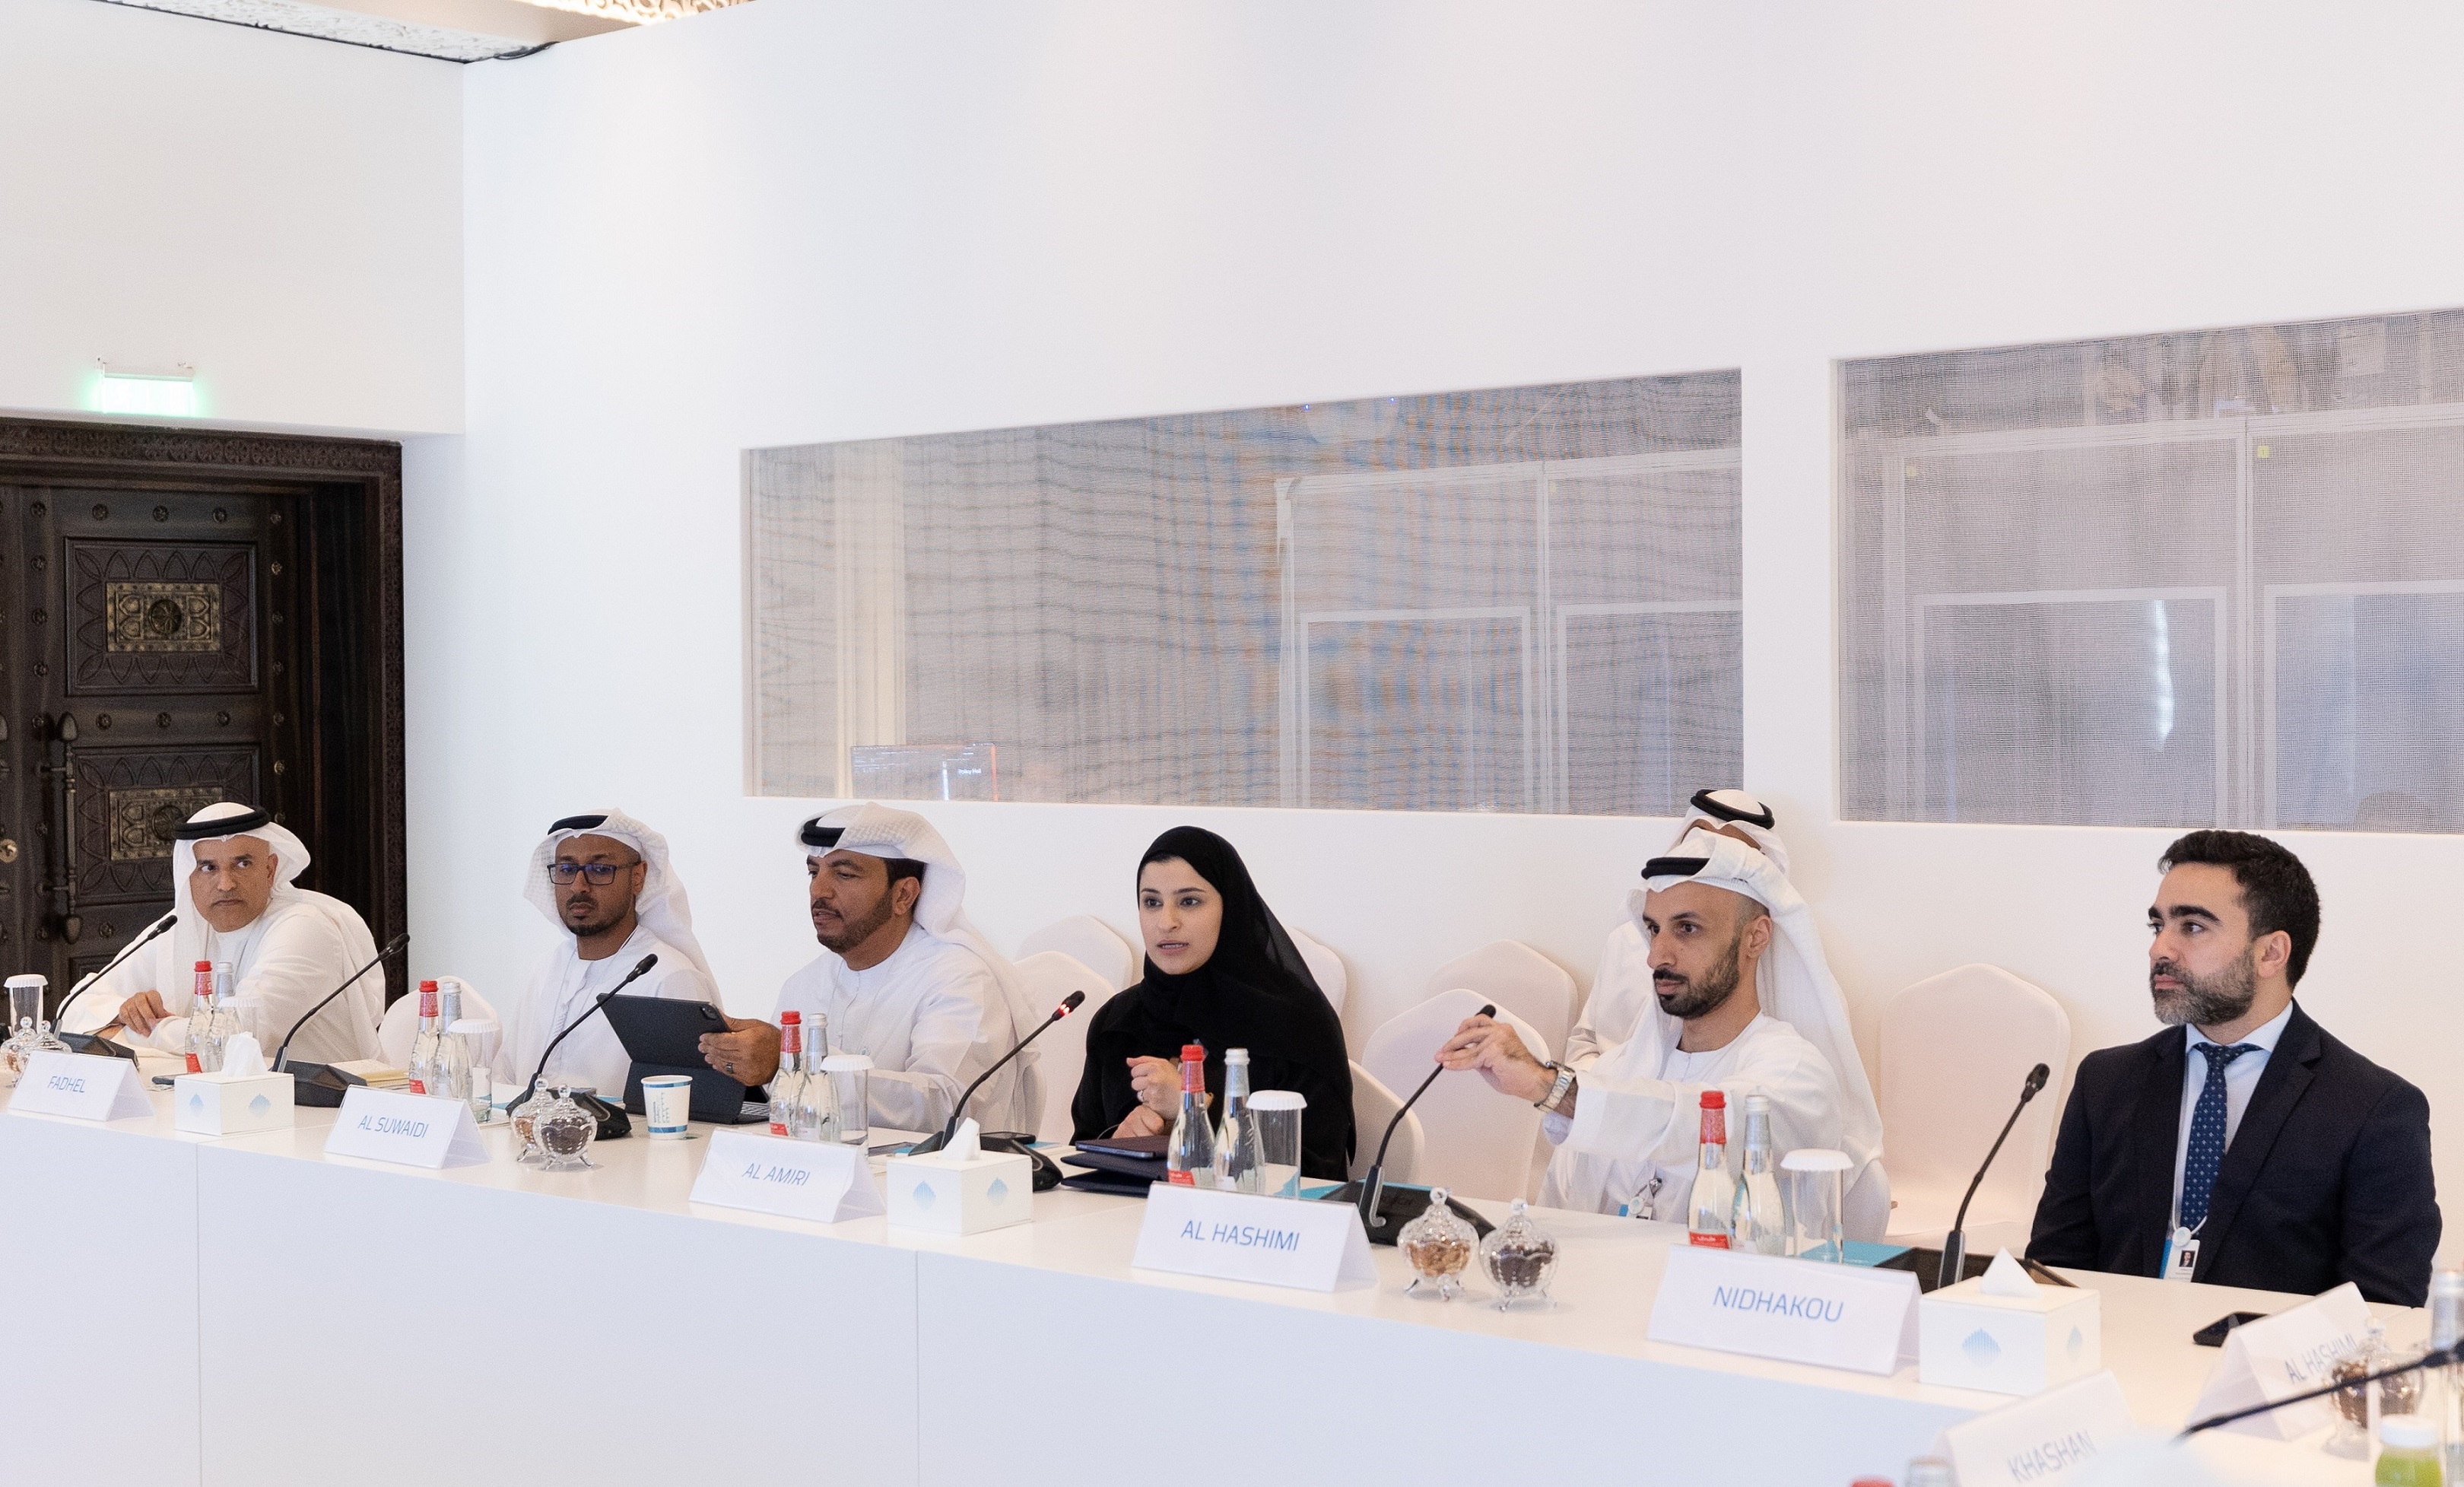 The Ministry of Industry and Advanced Technology launches the "Industrial Sustainability Alliance" to promote green technology and accelerate sustainable industrial growth